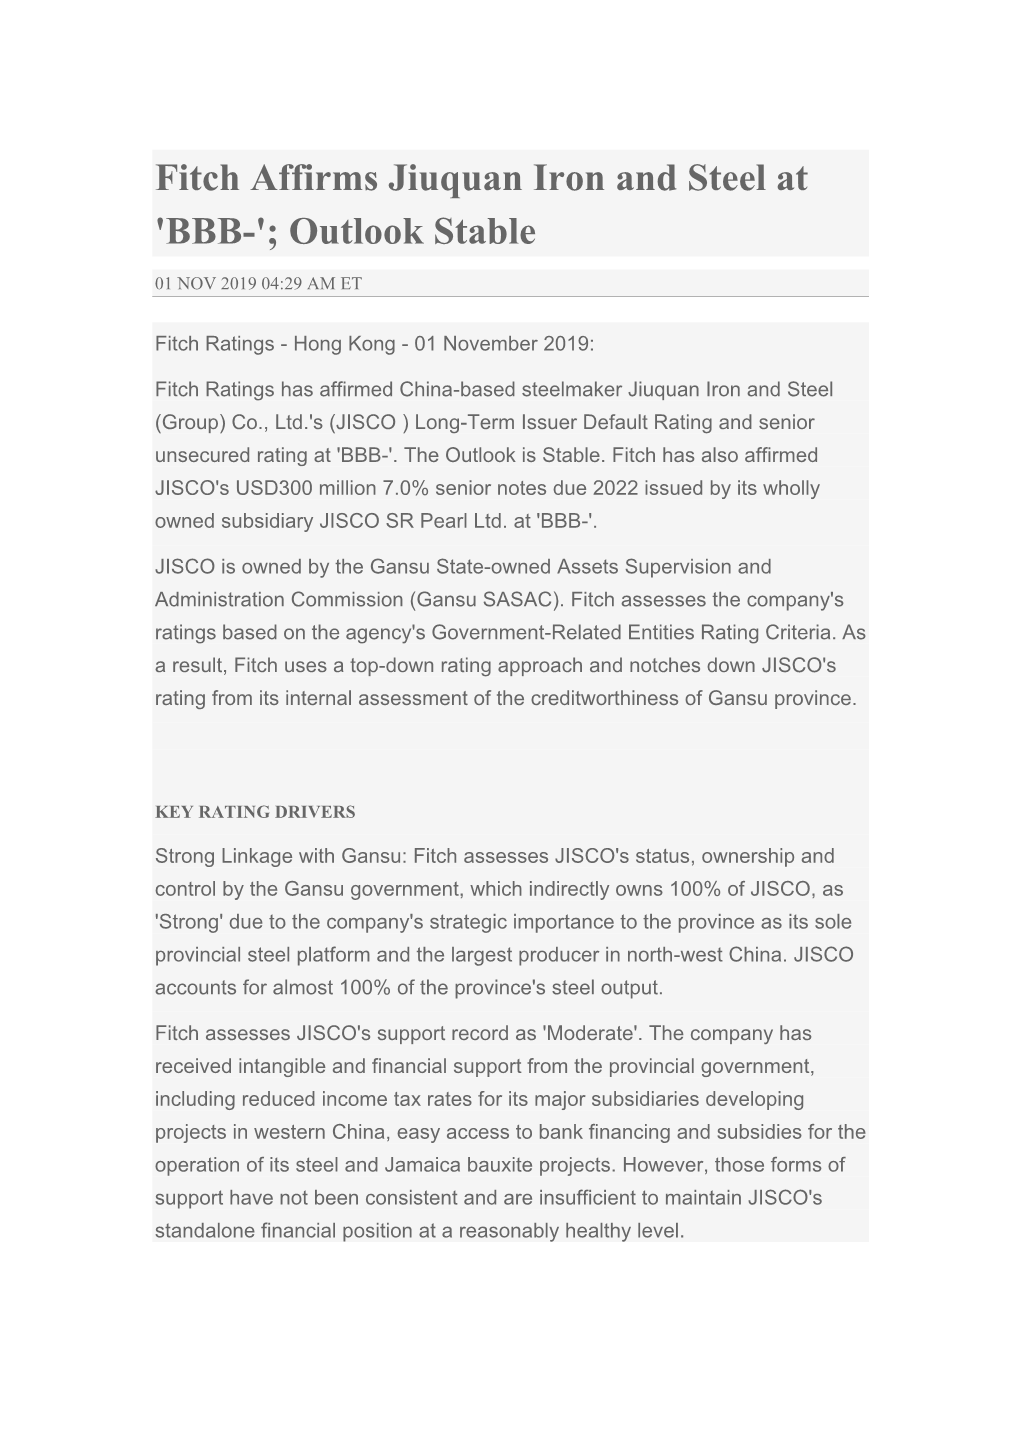 Fitch Affirms Jiuquan Iron and Steel at 'BBB-'; Outlook Stable